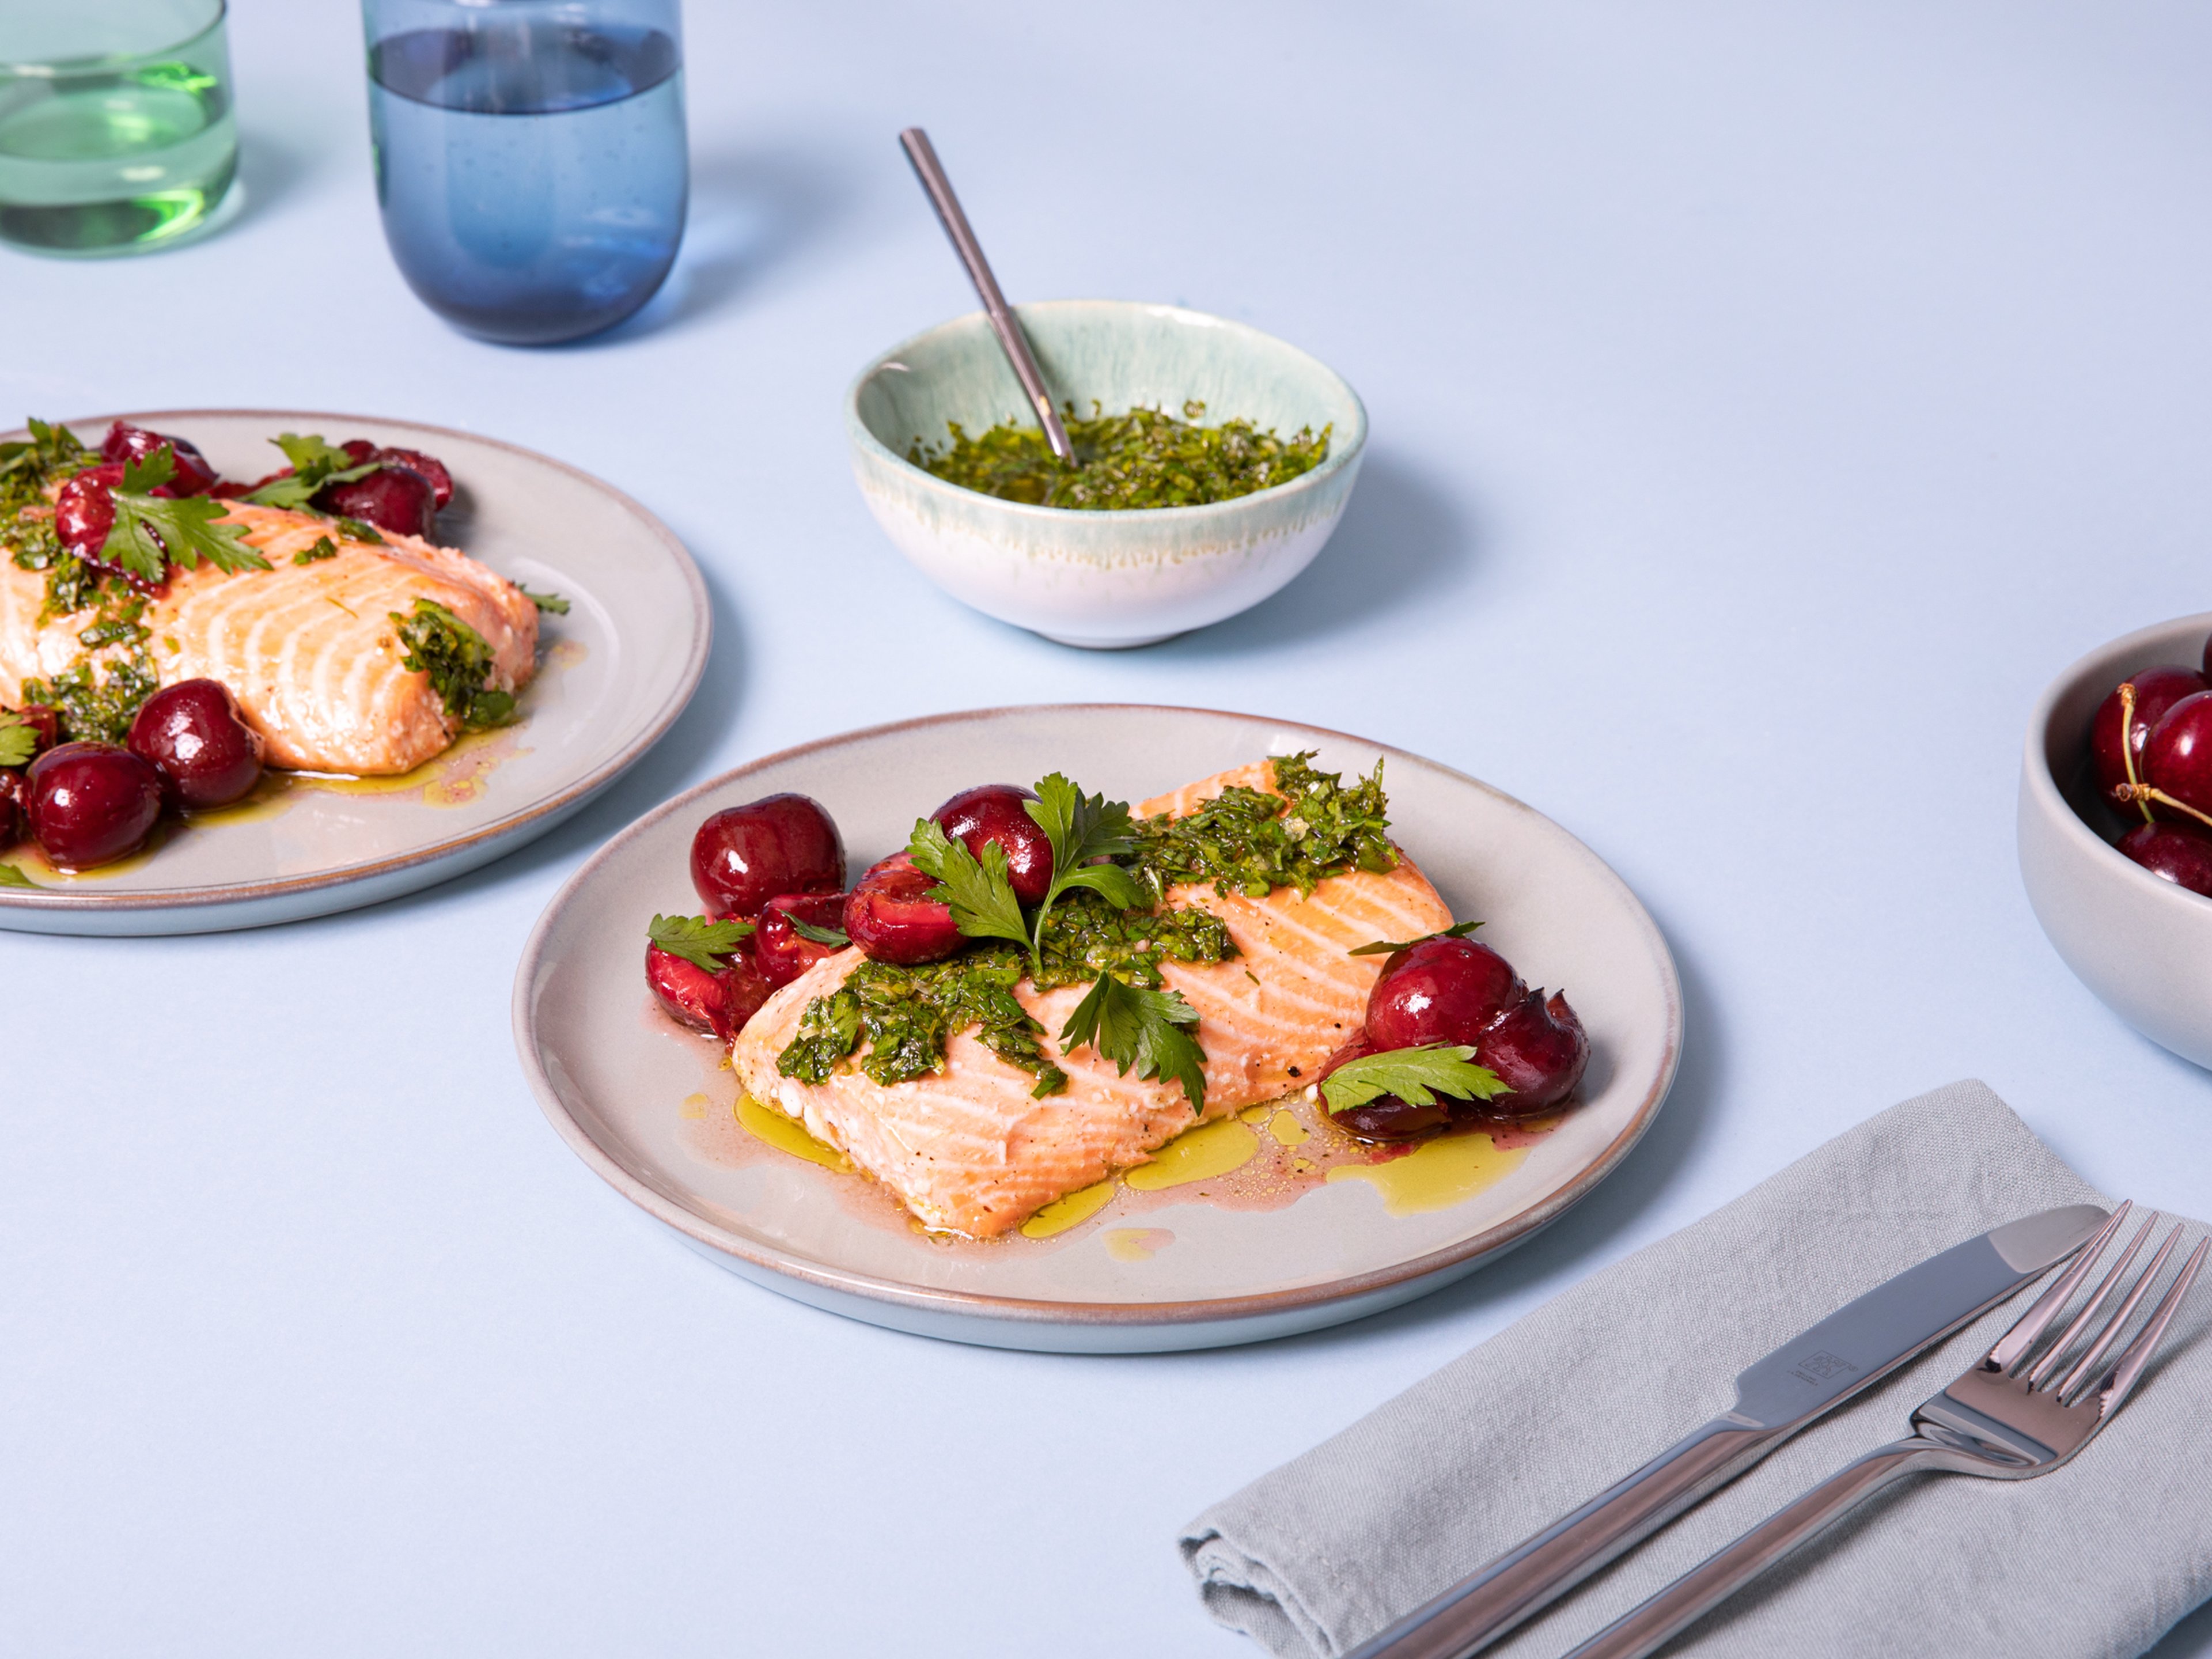 Parchment-baked salmon with sour cherries and parsley gremolata